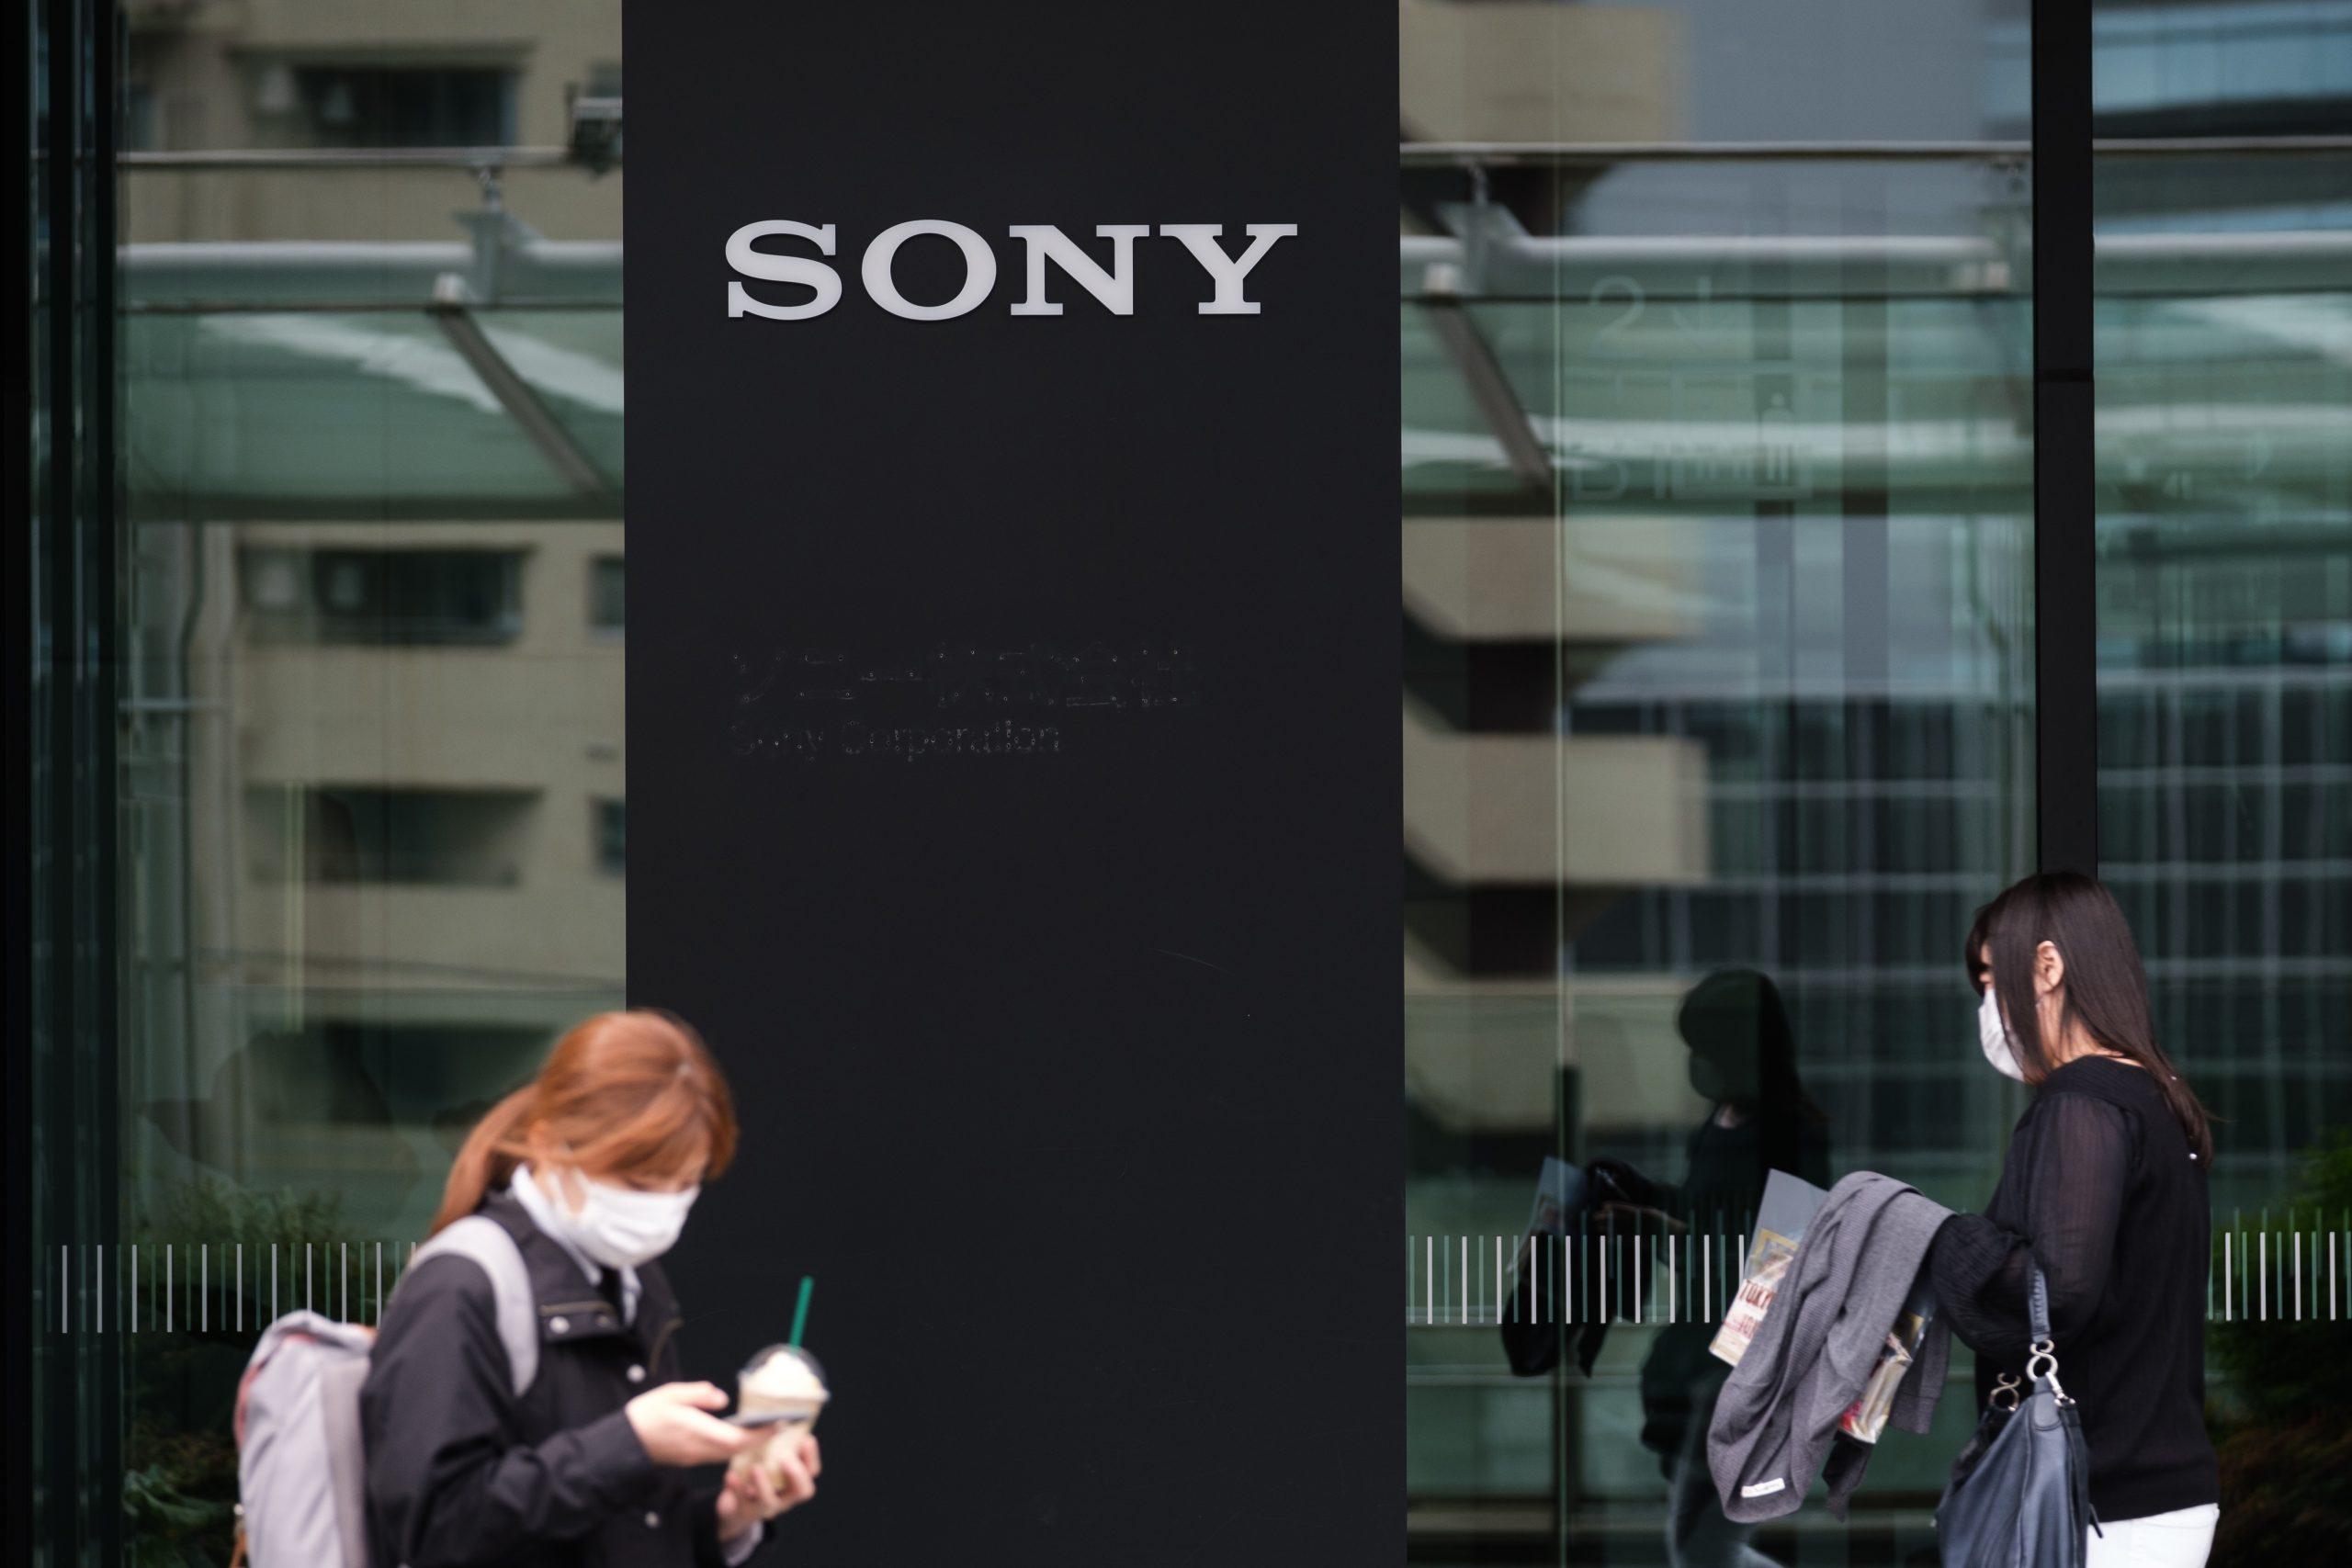 The Sony logo is displayed at the company's building in Tokyo on April 28. Photo: AFP